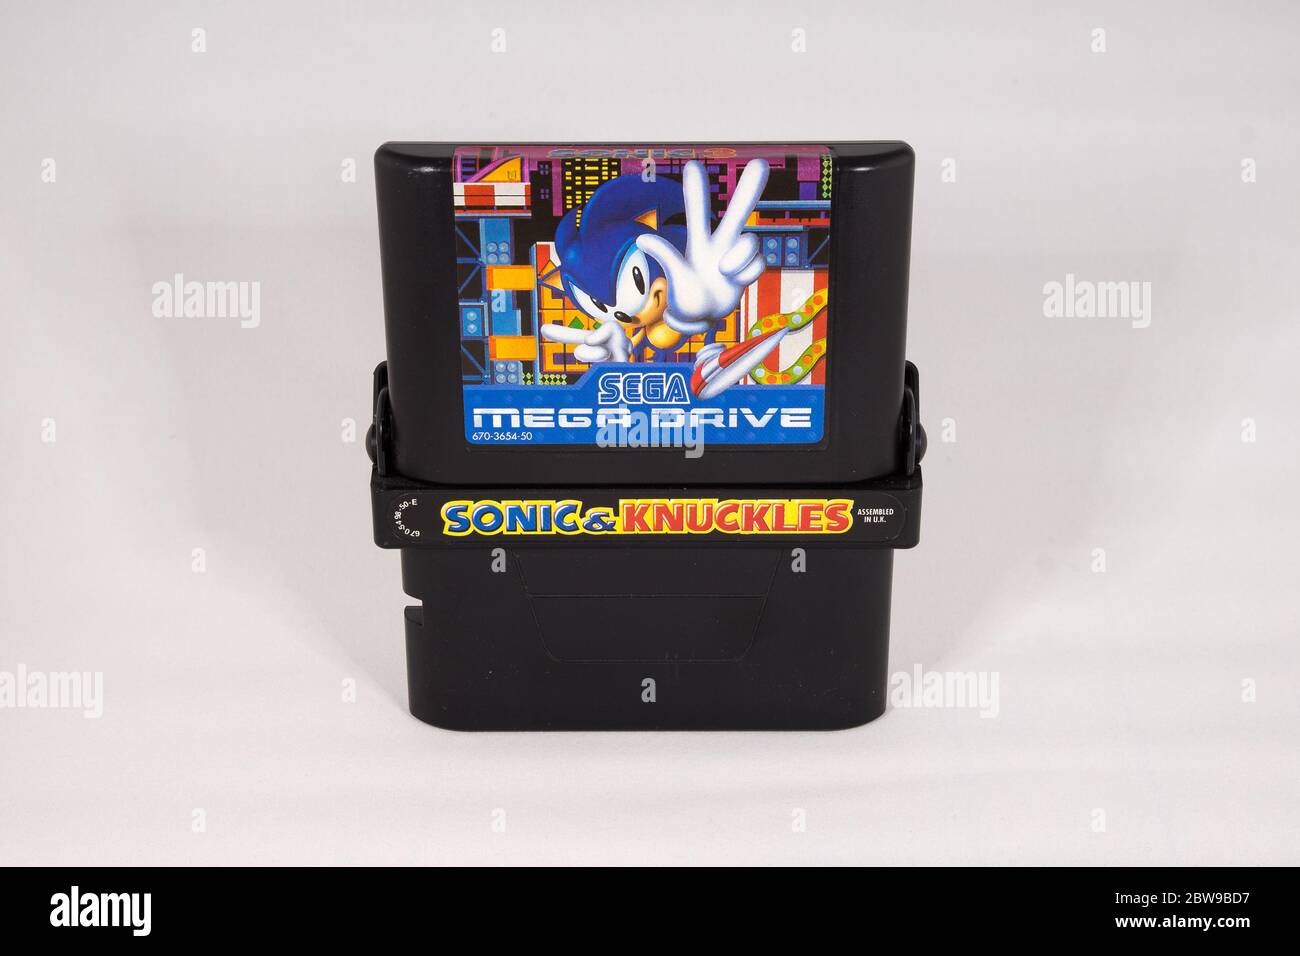 Sega Mega Drive cartridges, Sonic The Hedgehog 3 inserted into Sonic and Knuckles. Stock Photo